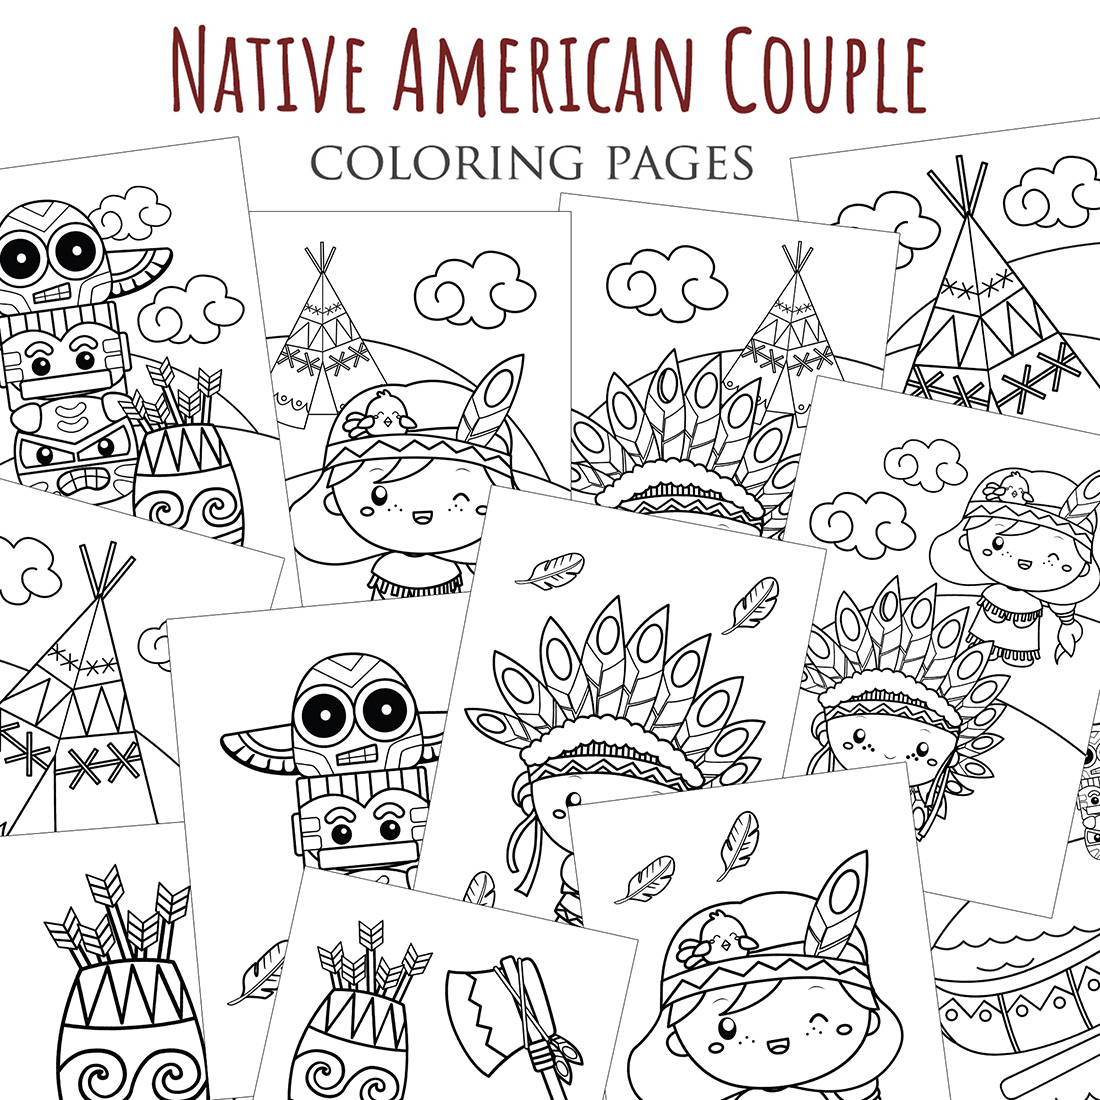 Cute Native American Indian Culture Kids Girl Boy Ancient Ornaments Costume Object Cartoon Coloring Activity for Kids and Adult cover image.